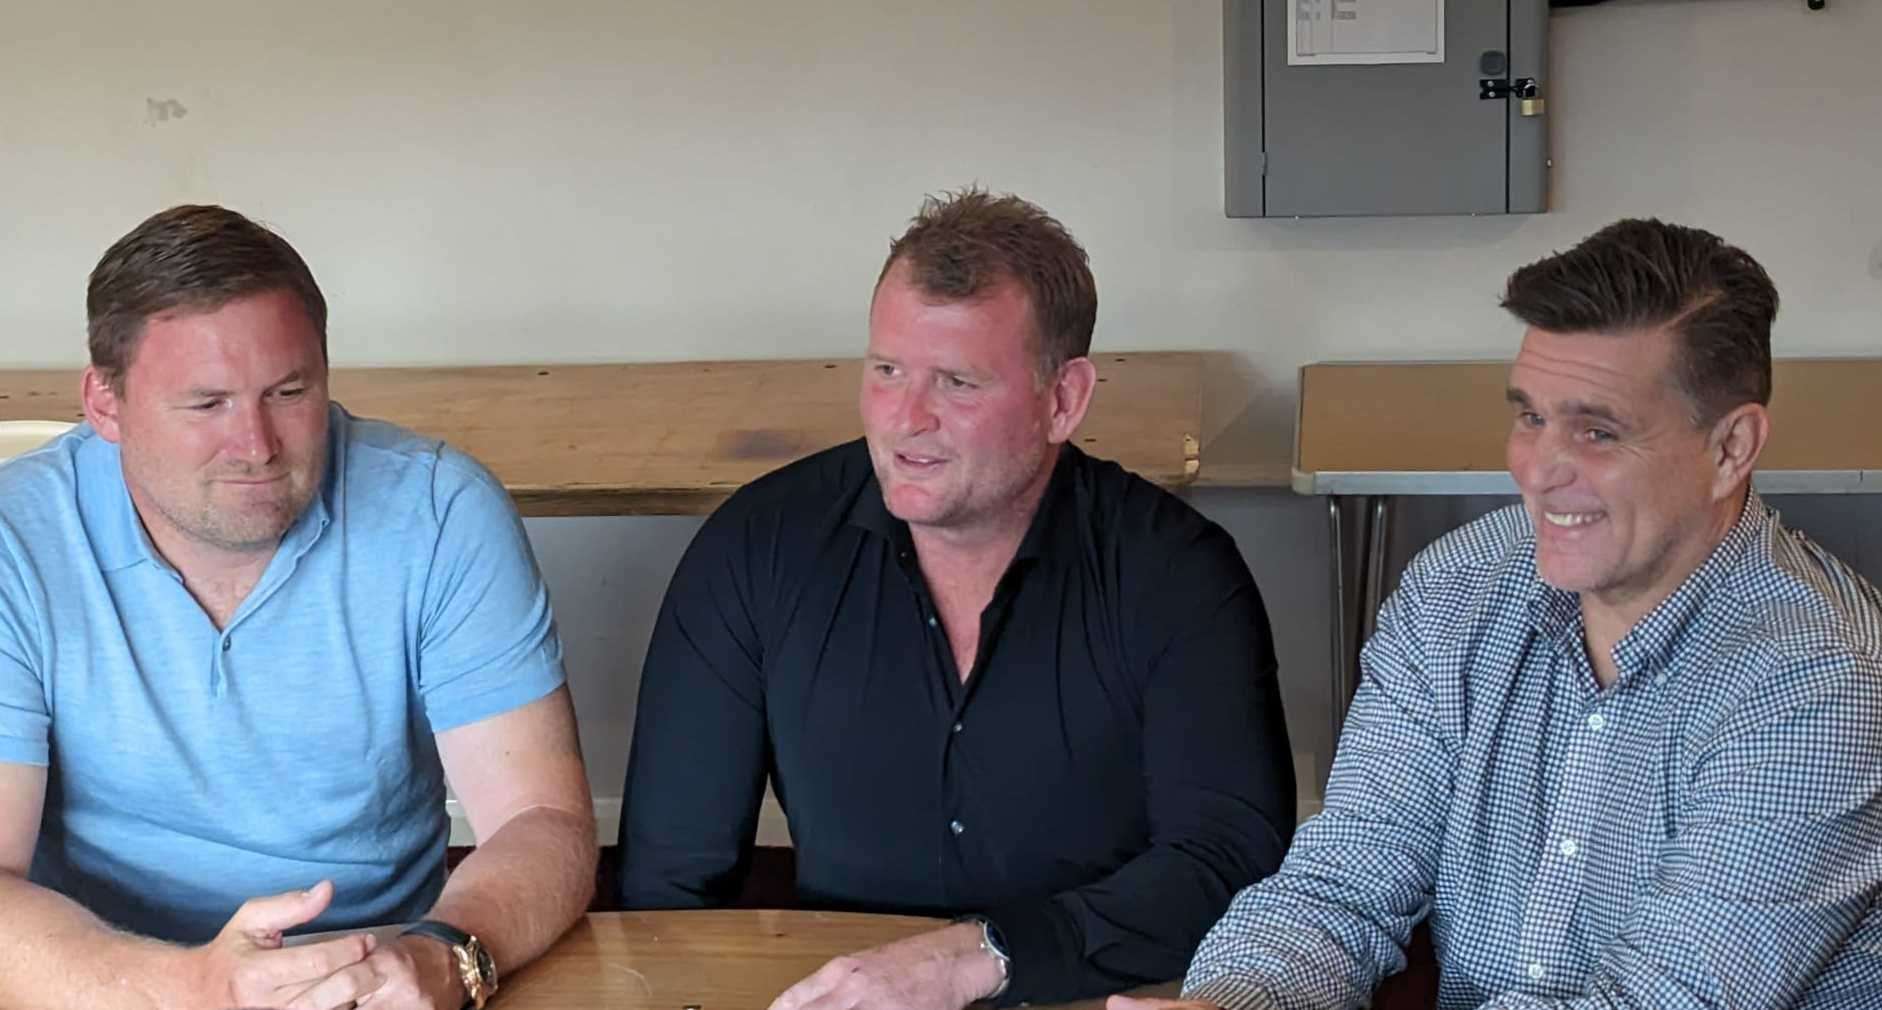 Lordswood Football Club vice chairman Gary Peck (left), chairman Ray Broad (middle) and director of football Jason Lillis (right) discuss their plans